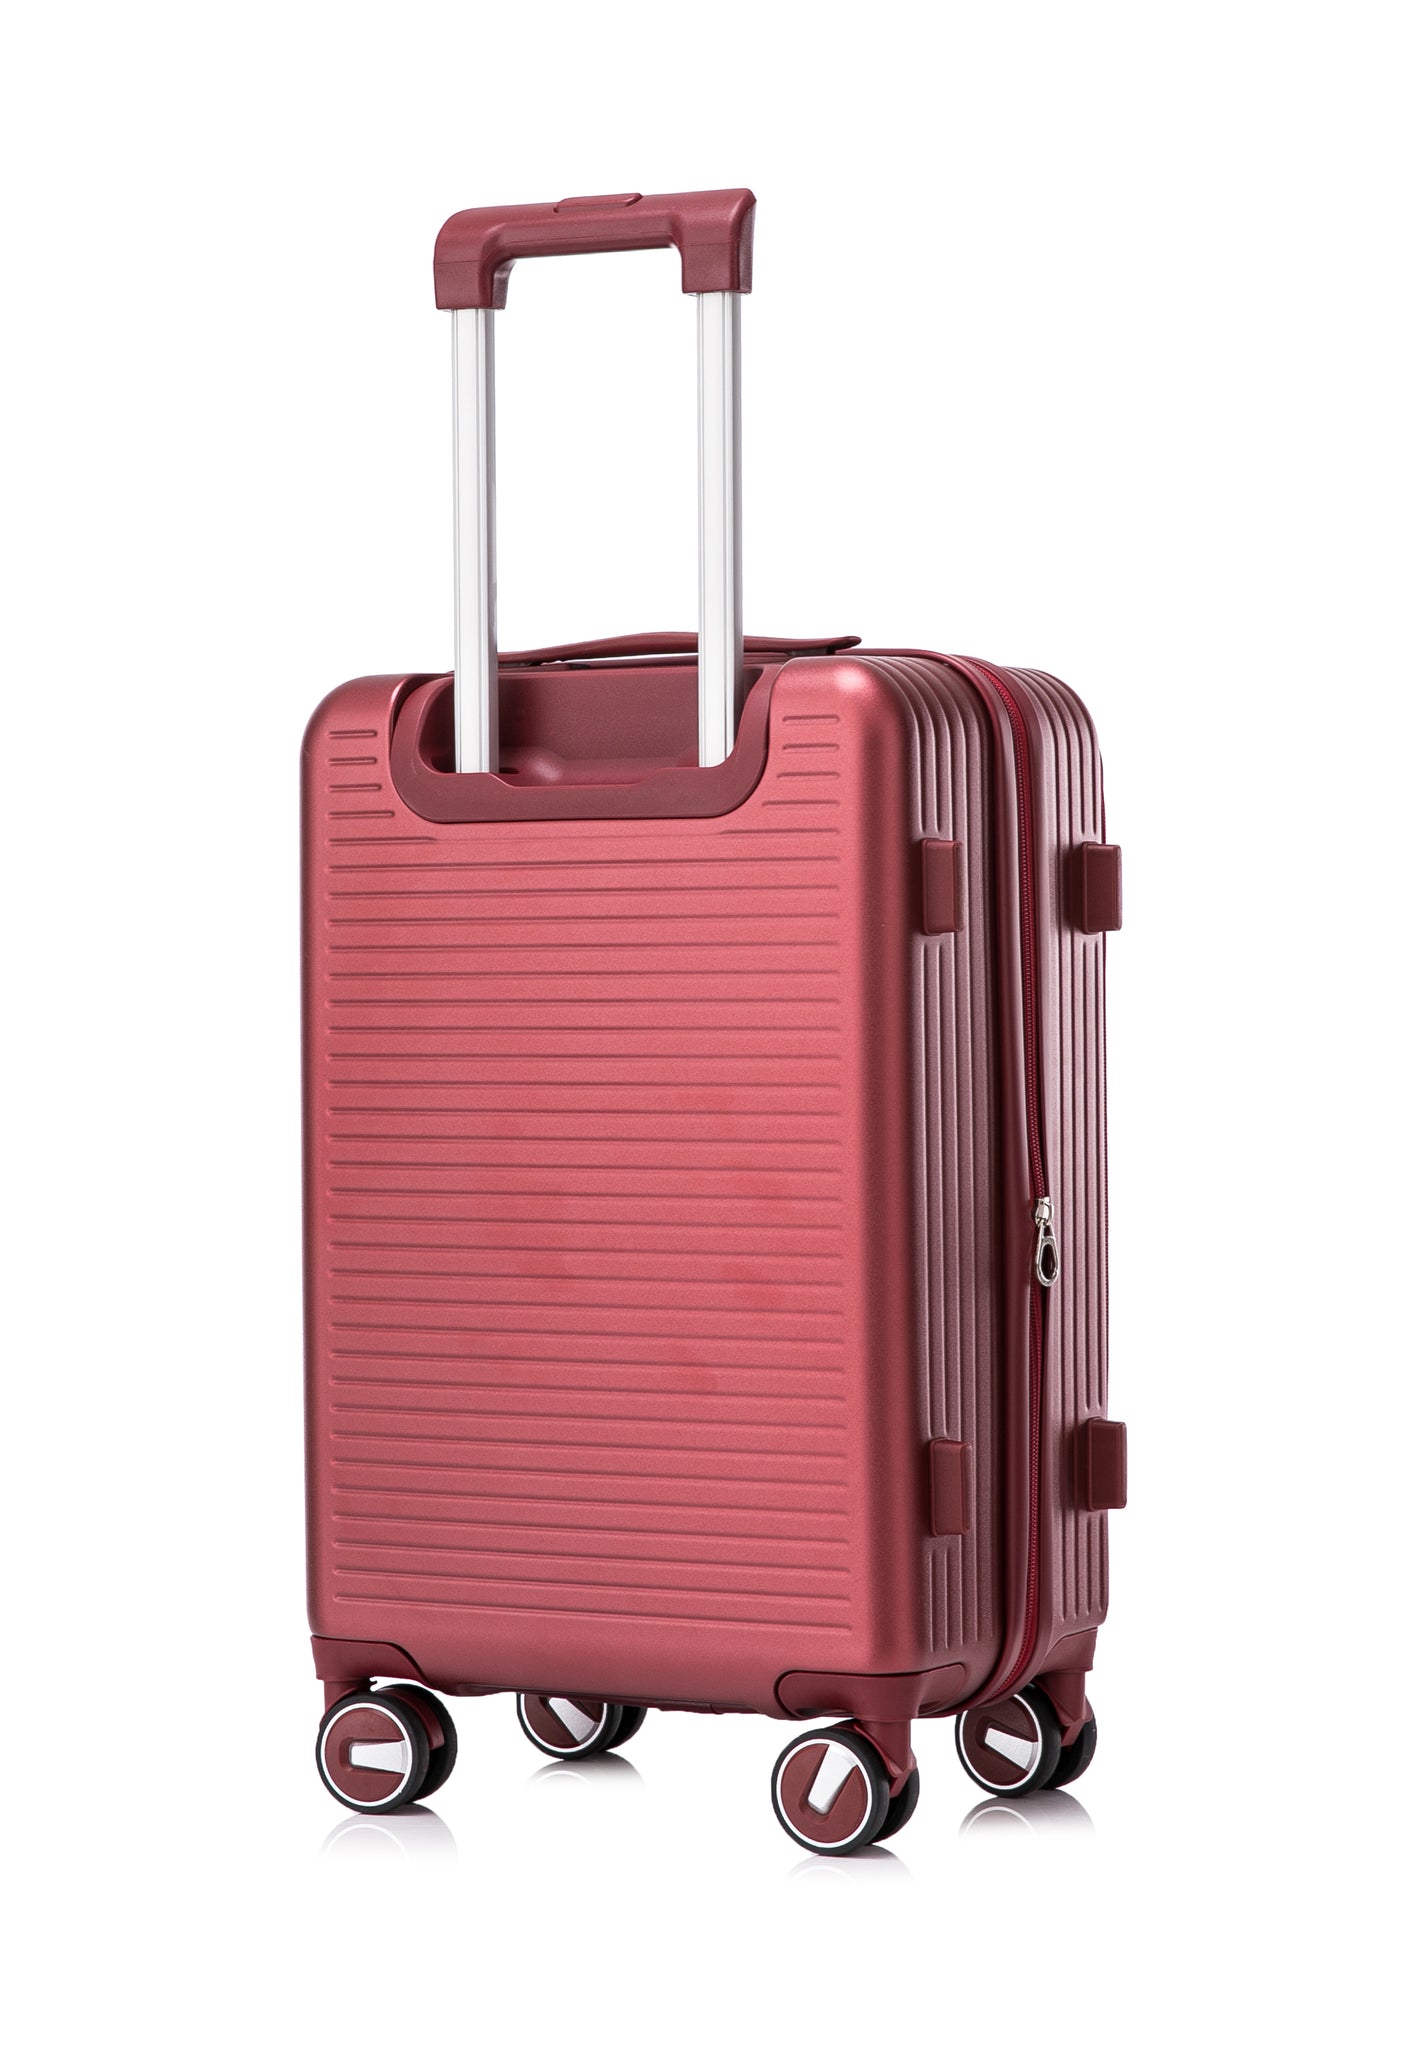 Luggage Sets 3 Piece 20 24 28 , Expandable Carry On wine red-pc